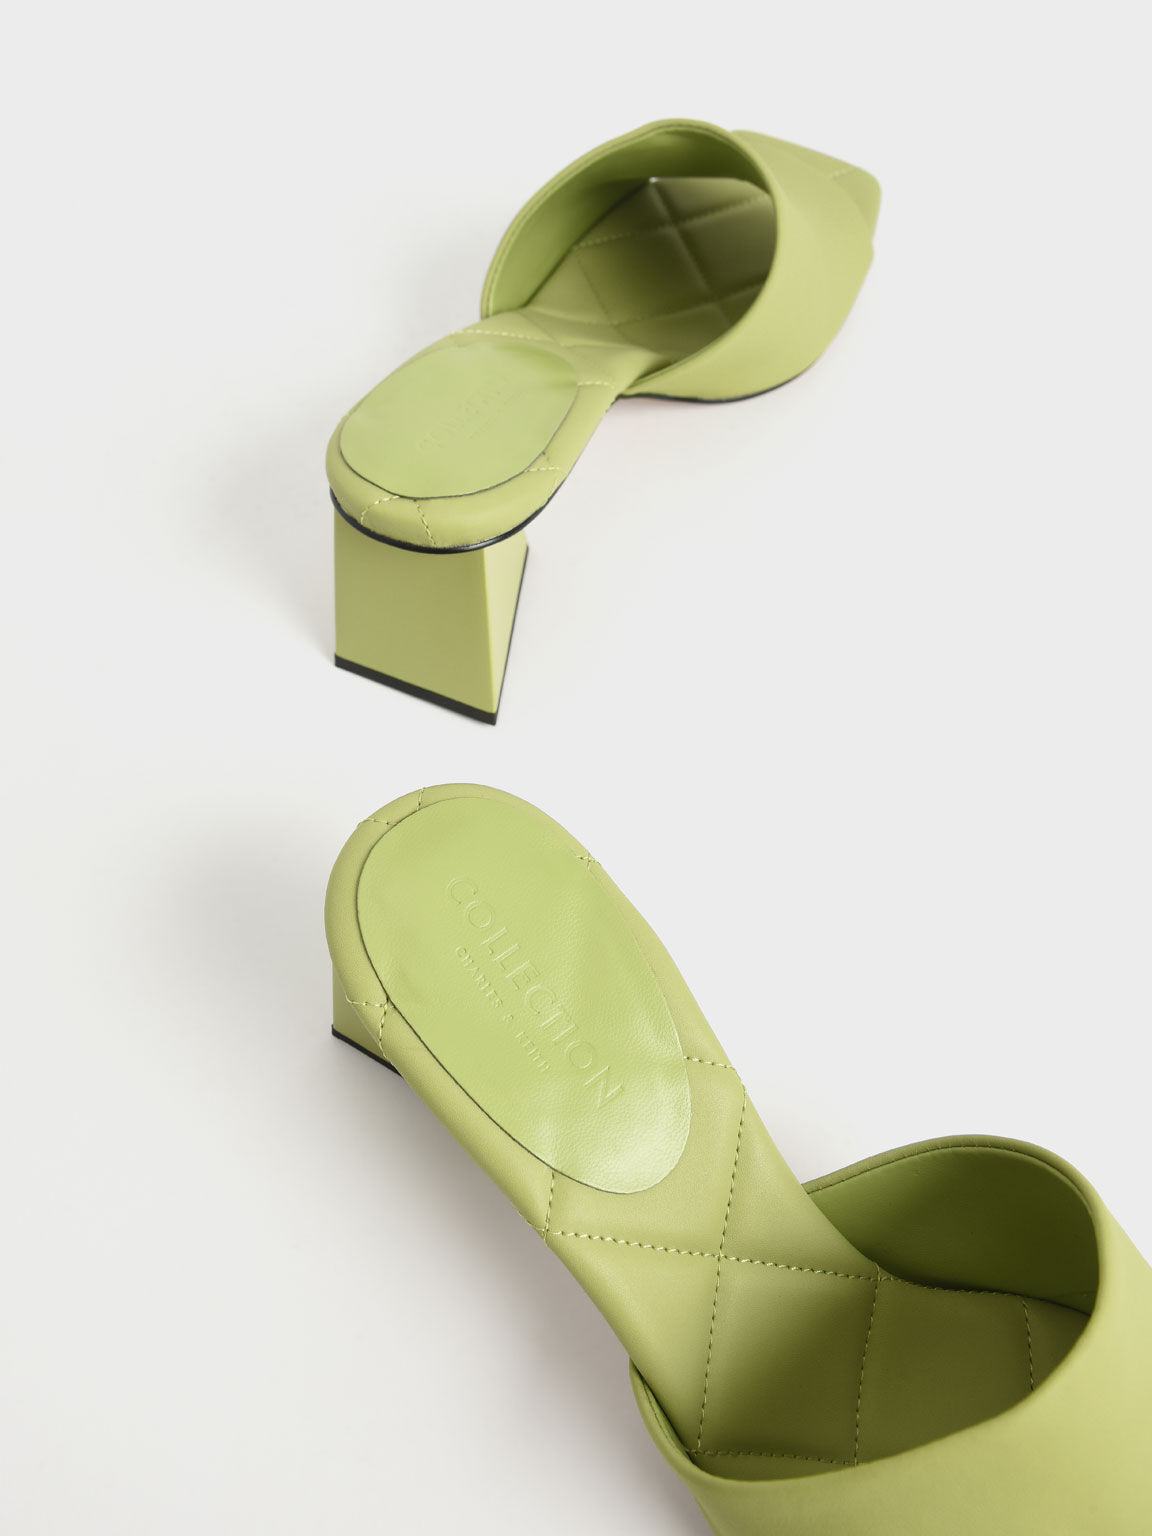 Sandal Leather Trapeze Heel Mules, Green, hi-res